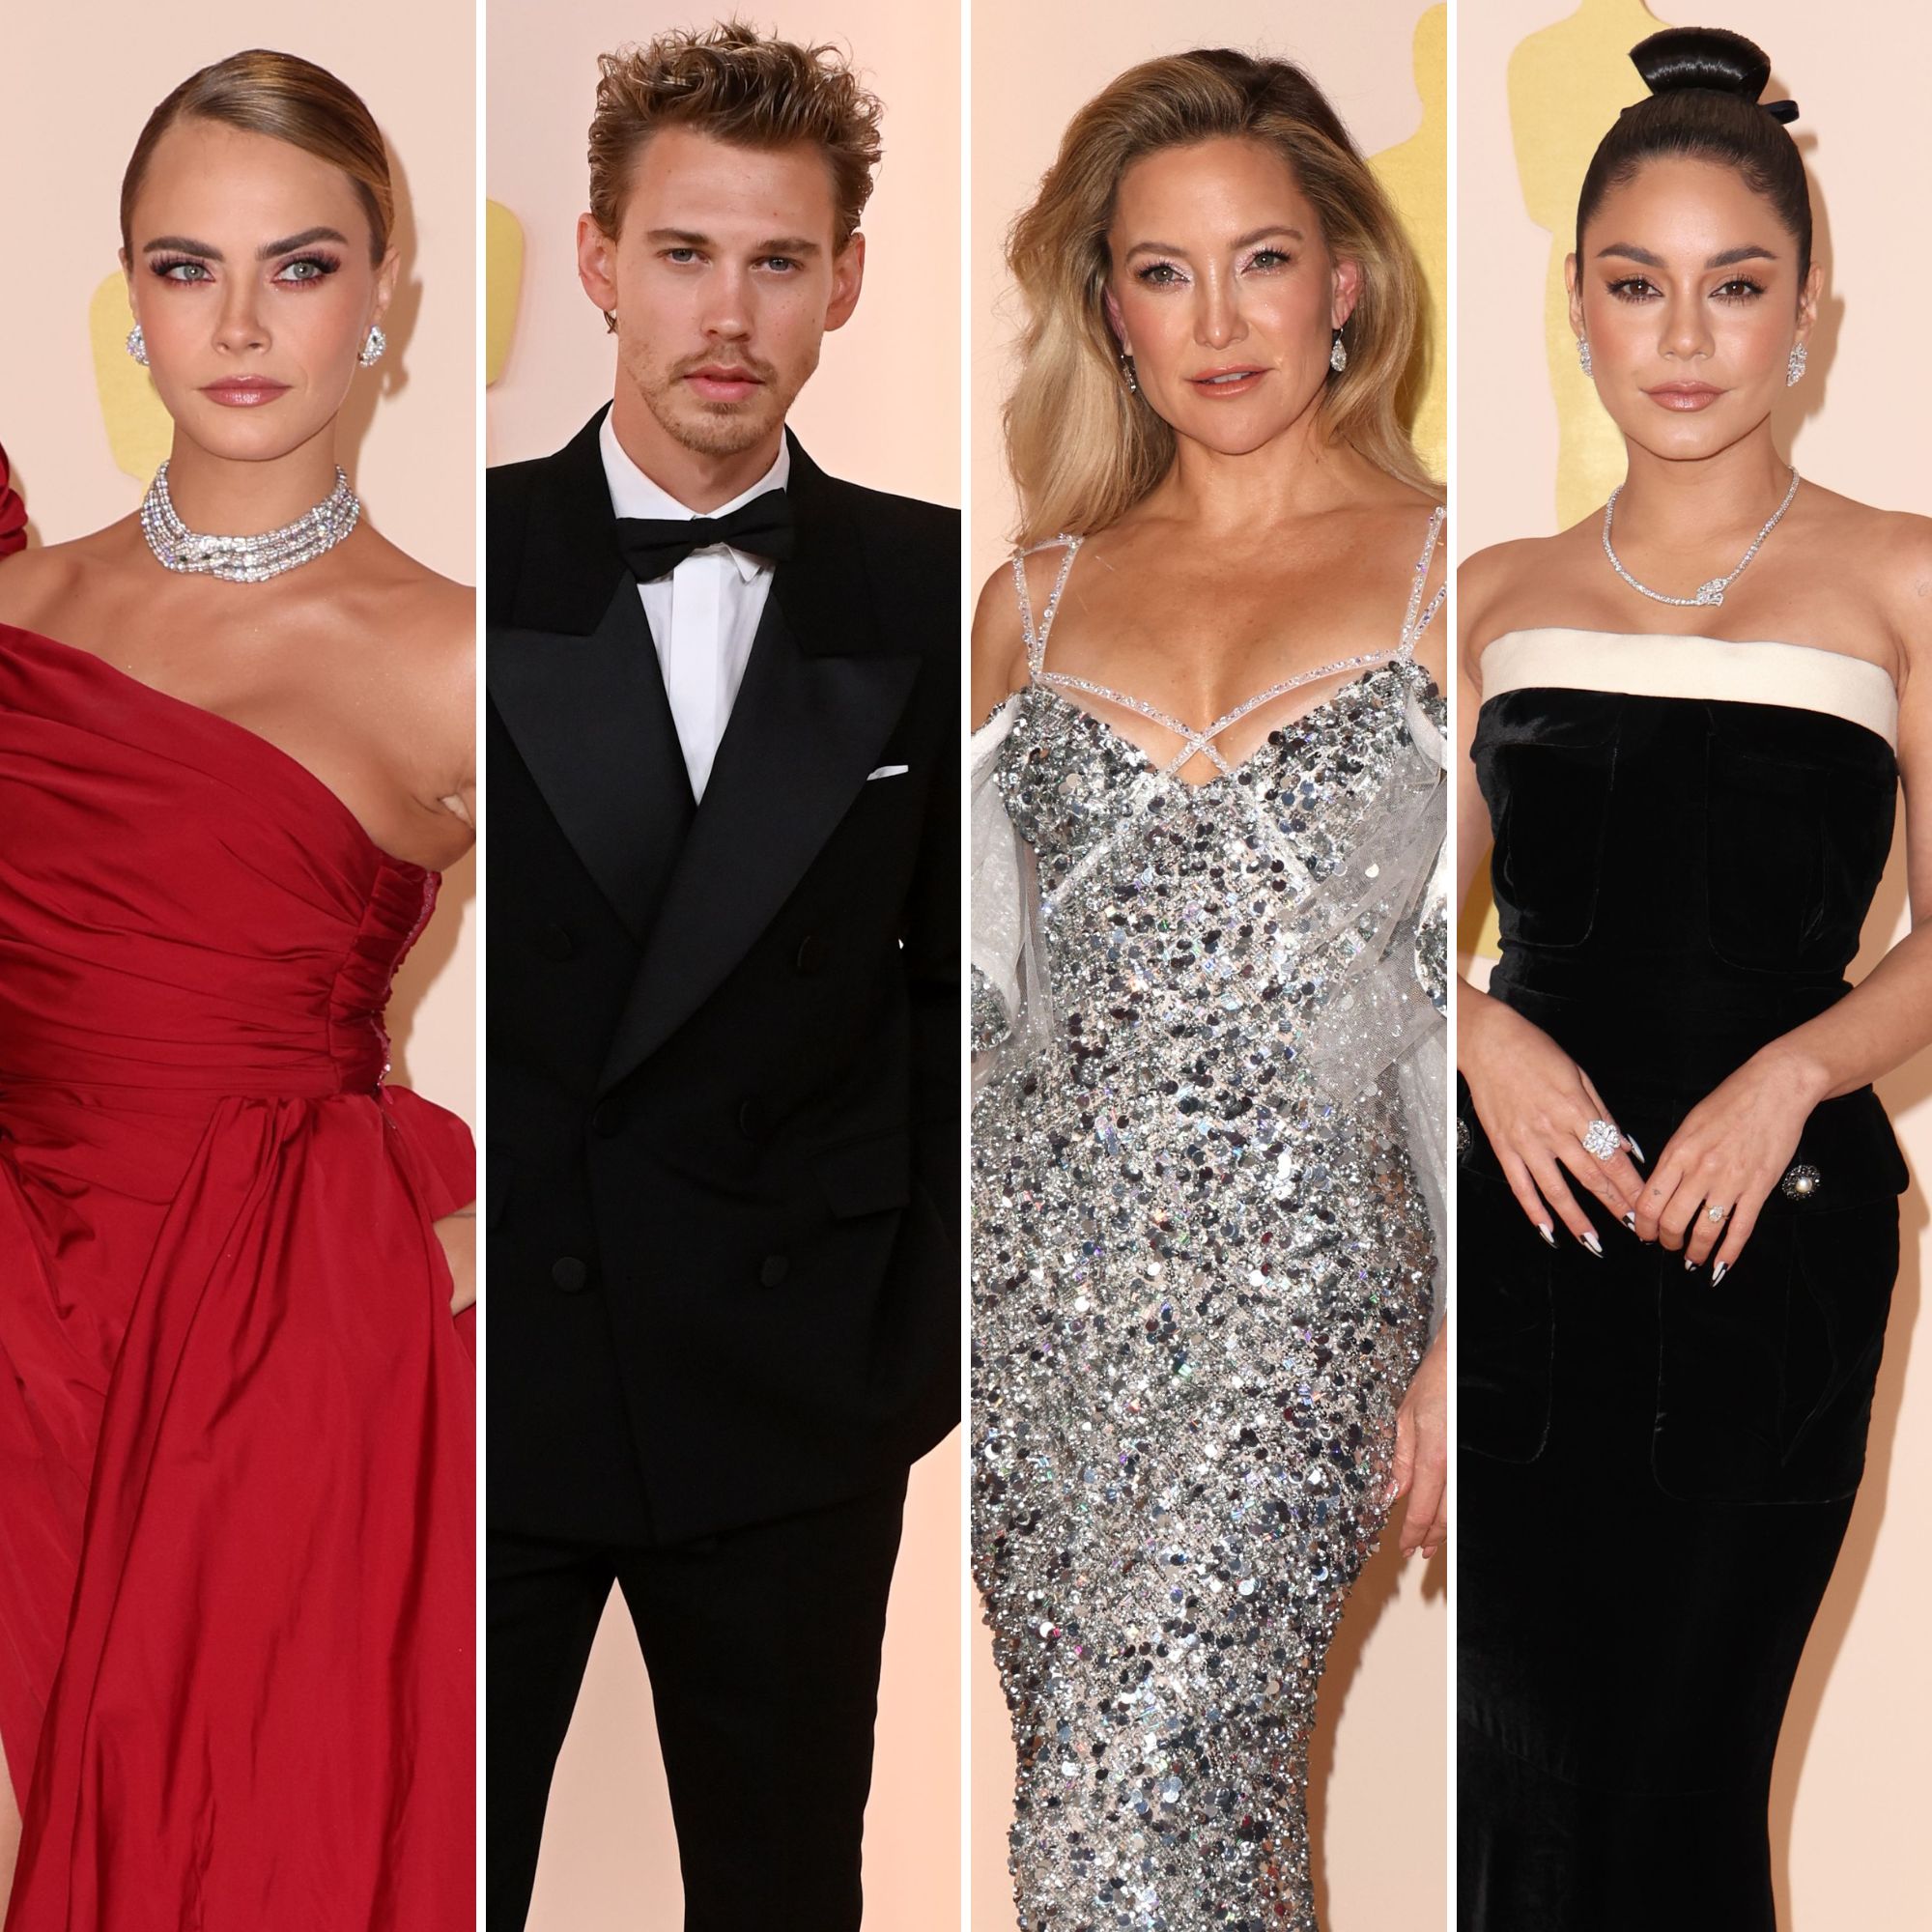 See All the Looks From the Oscars Red Carpet